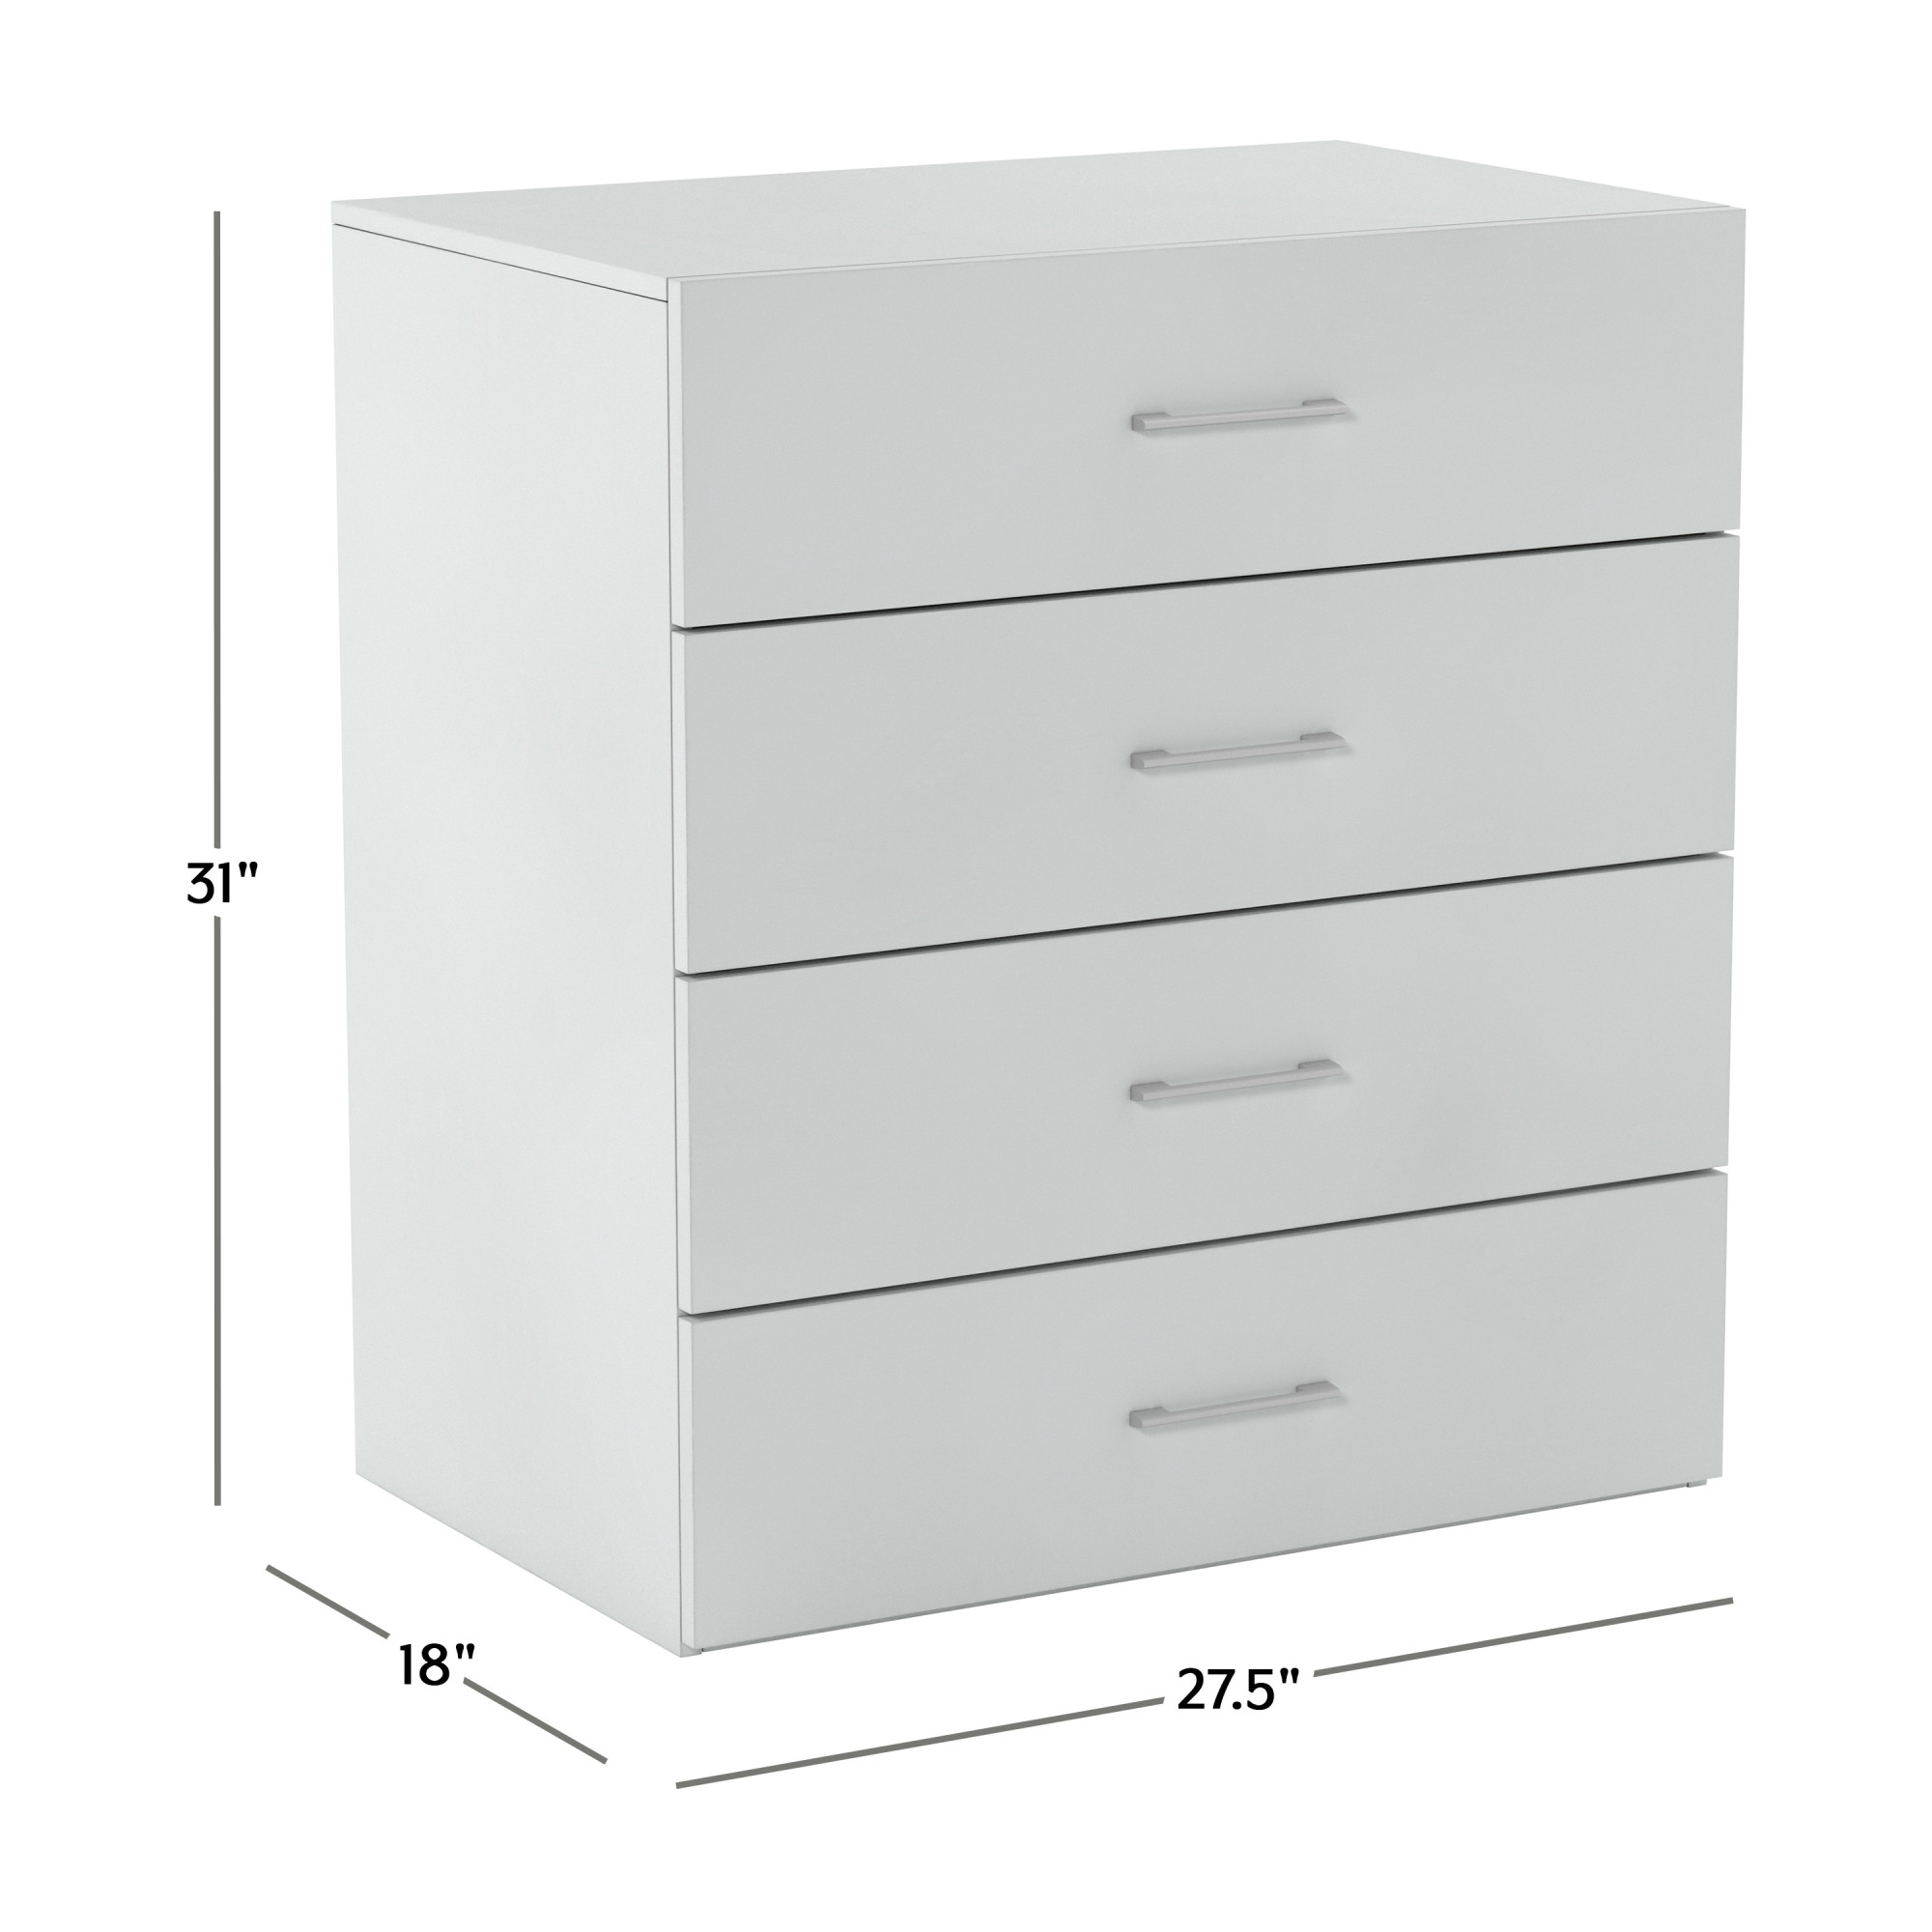 Lundy 4-Drawer Dresser, White, by Hillsdale Living Essentials - image 3 of 17